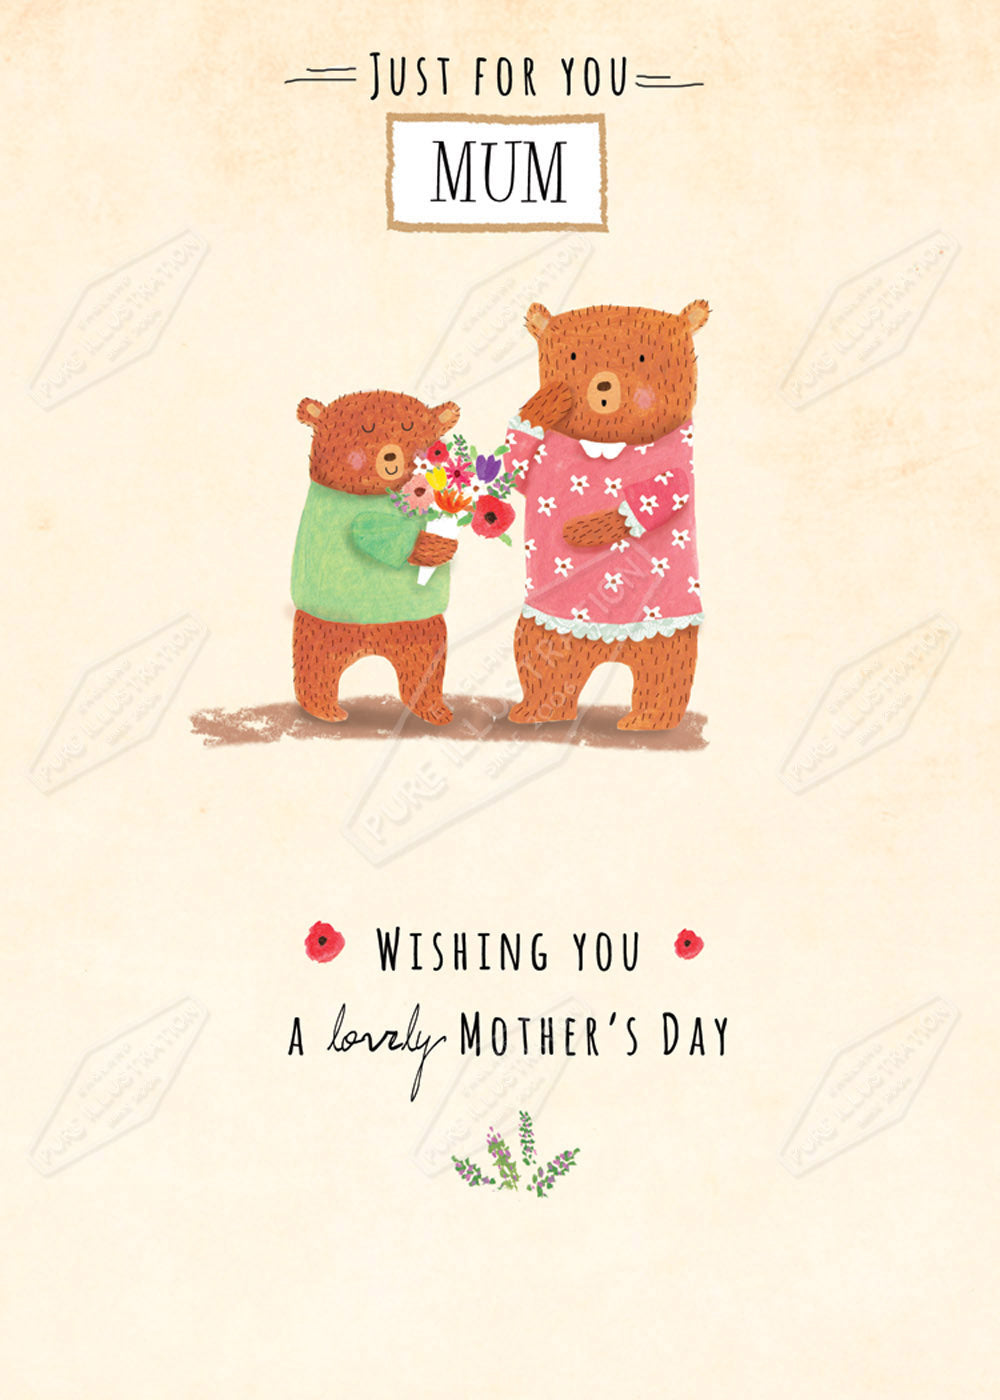 Cute Mother's Day Greeting Card Design by Cory Reid for Pure Art Licensing Agency & Surface Design Studio